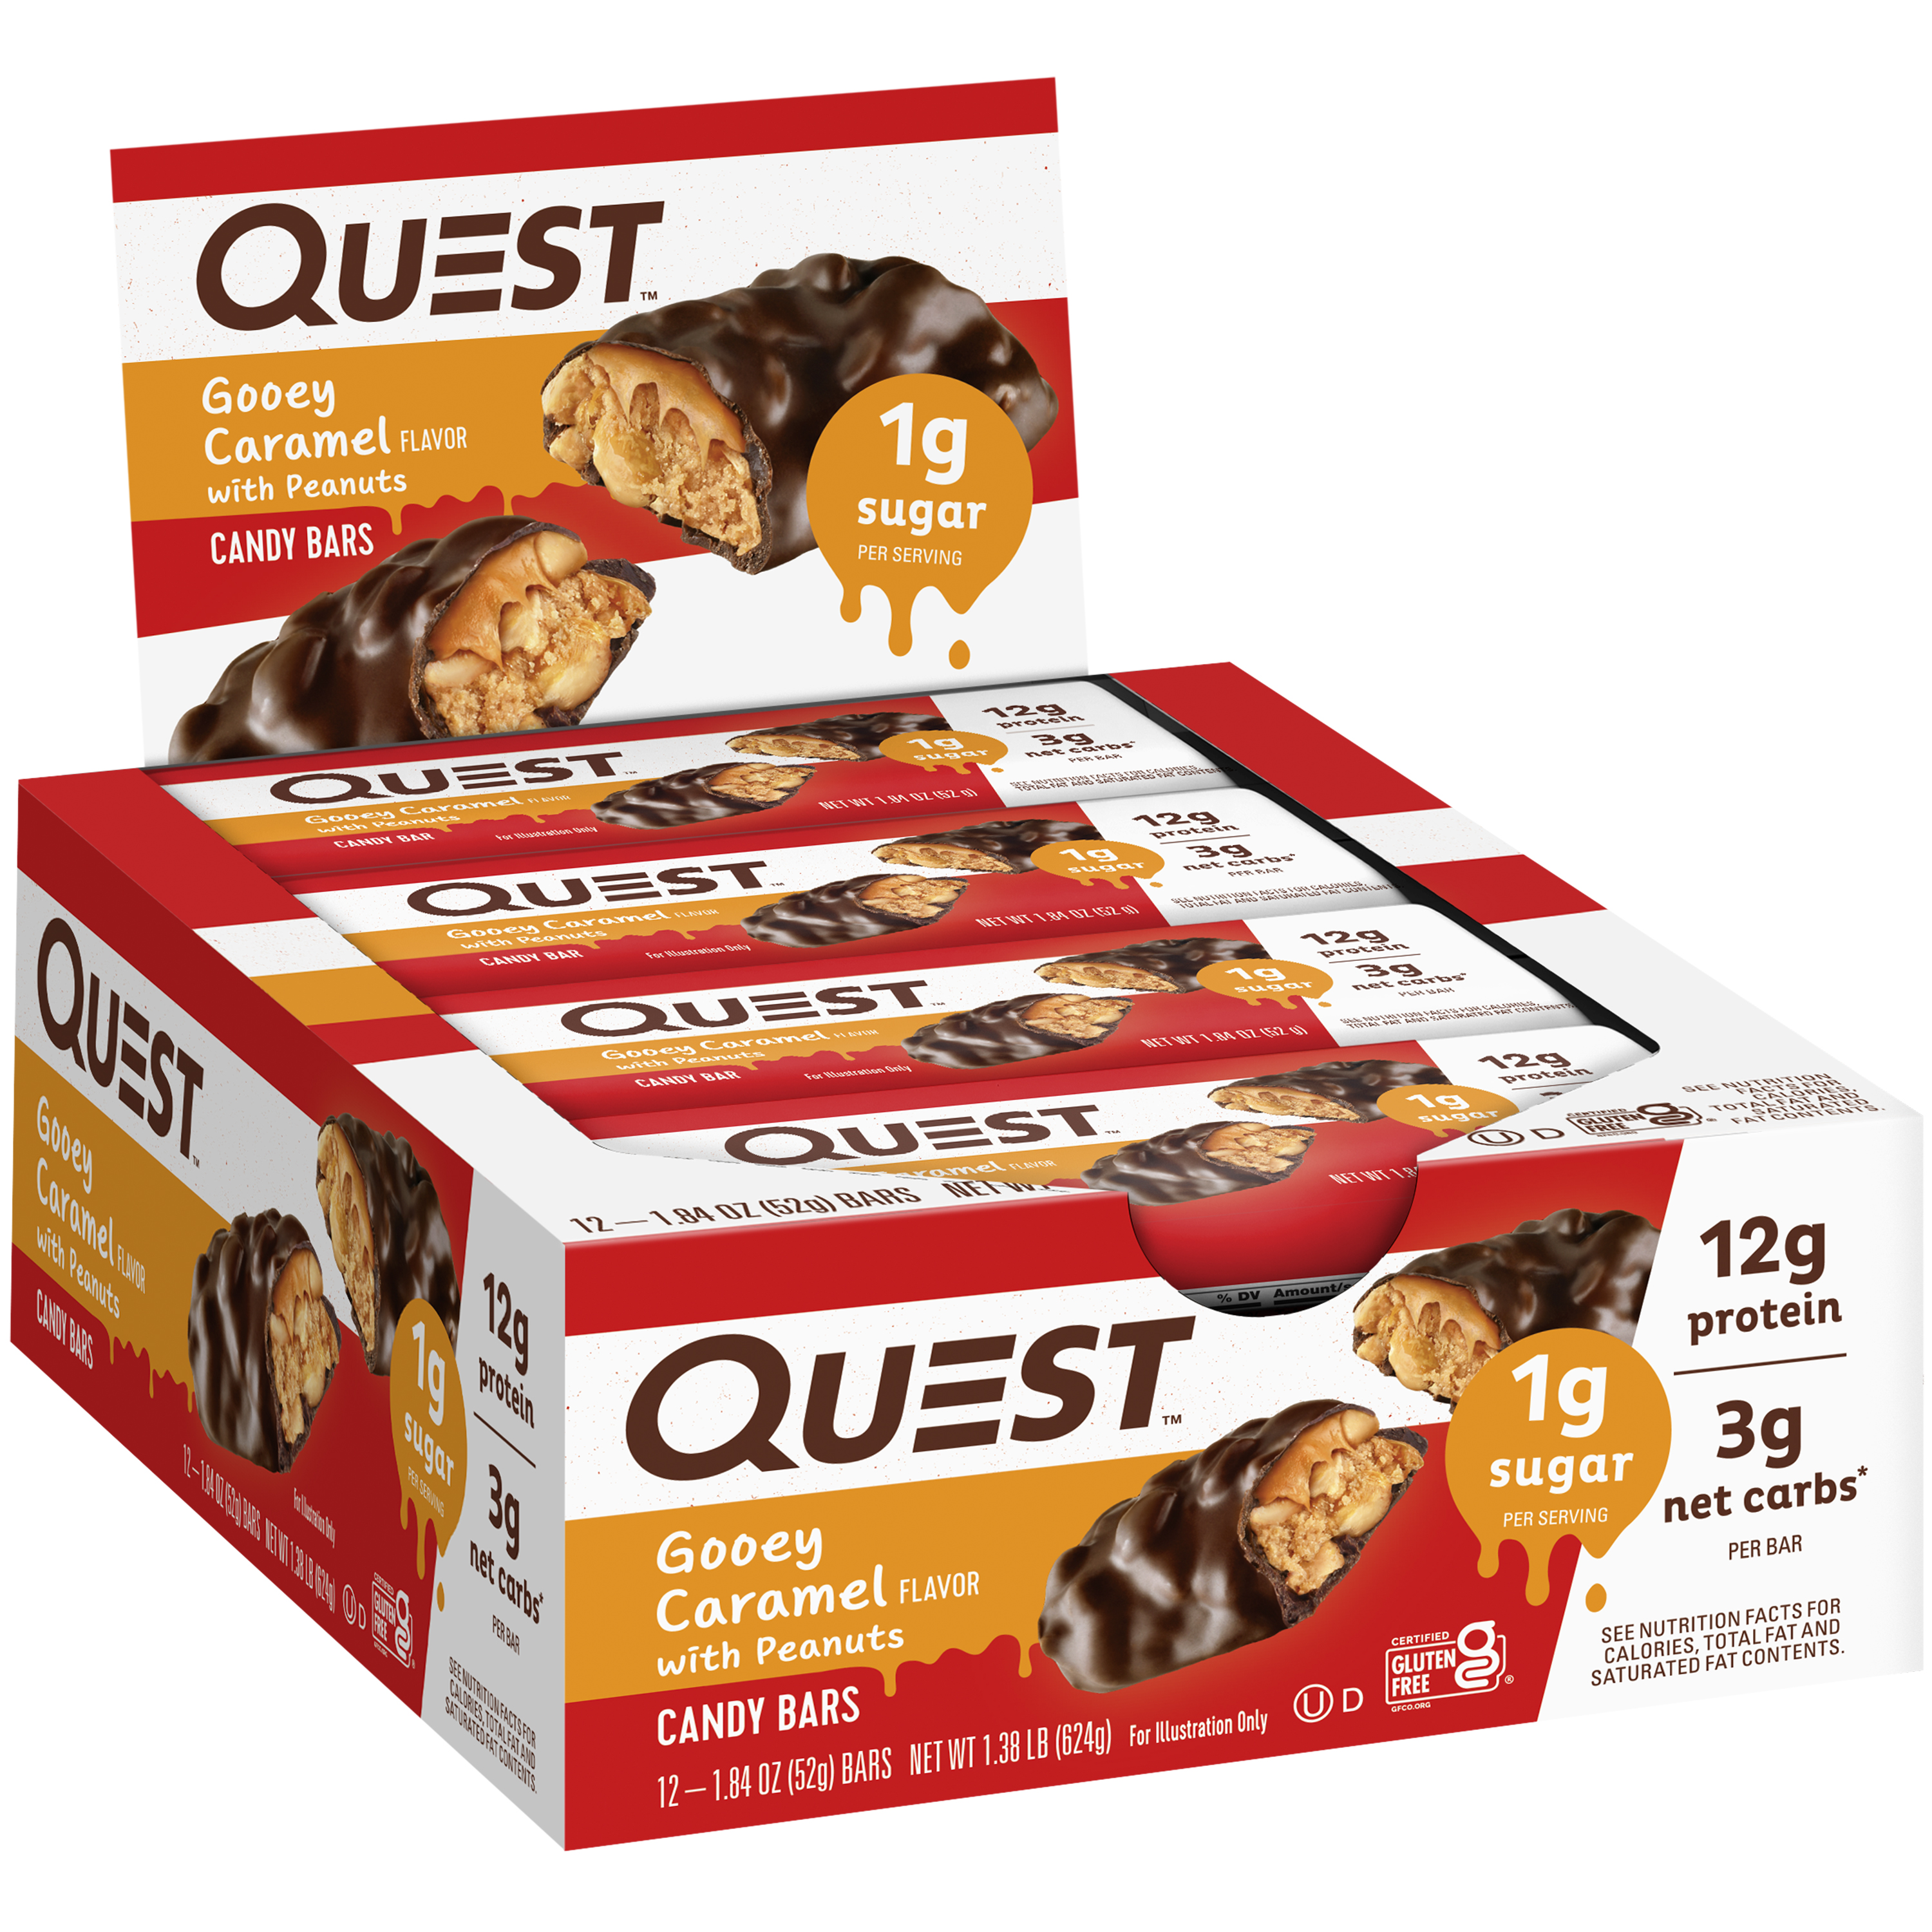 Quest Protein Candy Bar Snacks, Gooey Caramel with Peanuts flavor,  12 Count - image 3 of 11